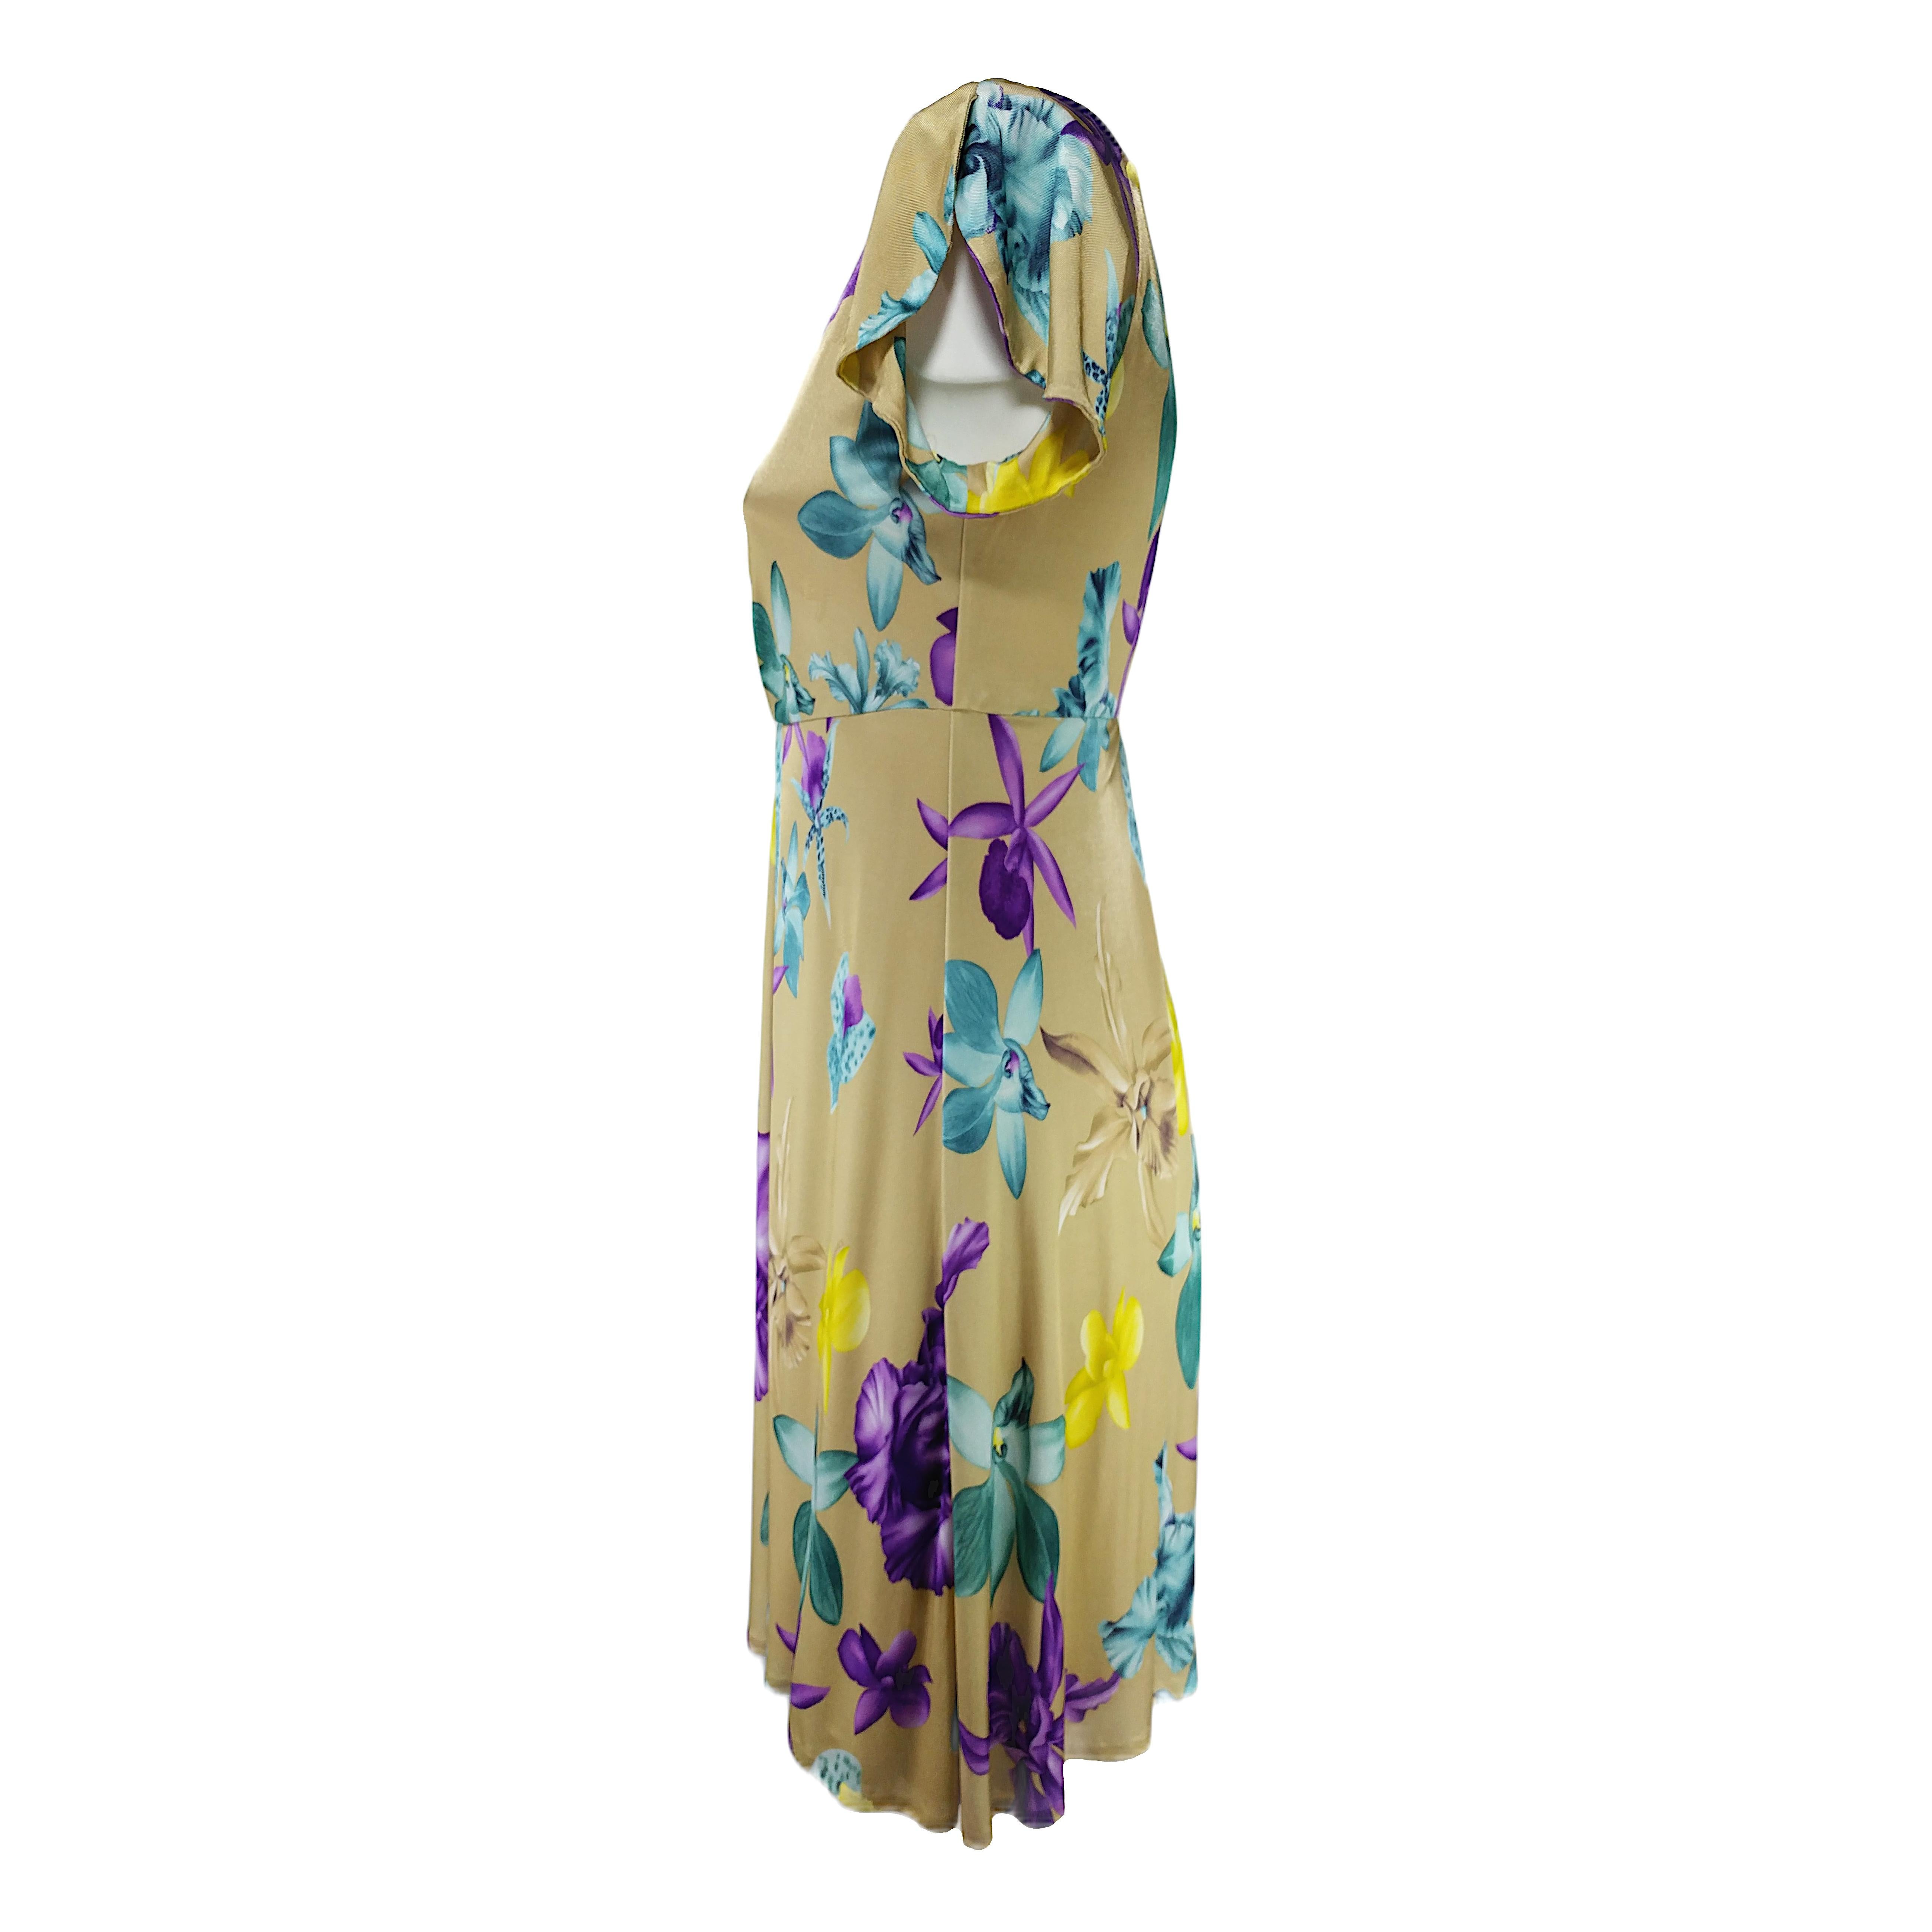 A glamorous vintage dress by Versace from the late 90s or early y2k, in excellent vintage conditions and carefully reconditioned. It features a wide round neckline, short sleeves and a soft viscose beige fabric printed with yellow, purple and green